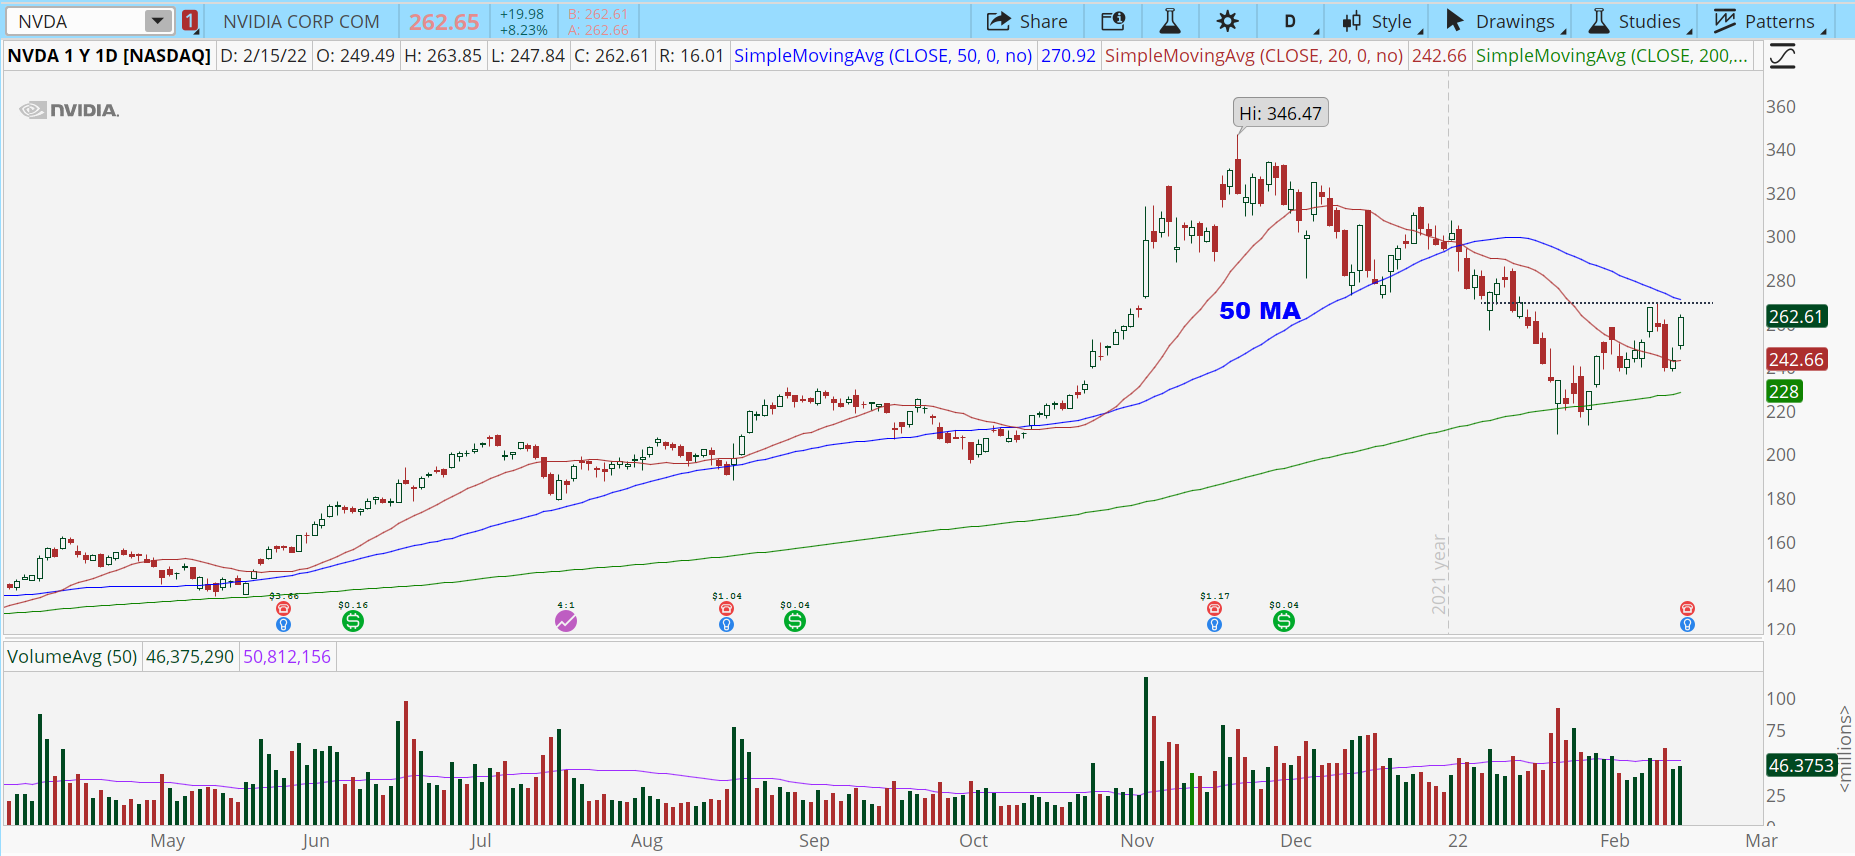 Nvidia (NVDA) daily stock chart with 50 MA resistance.